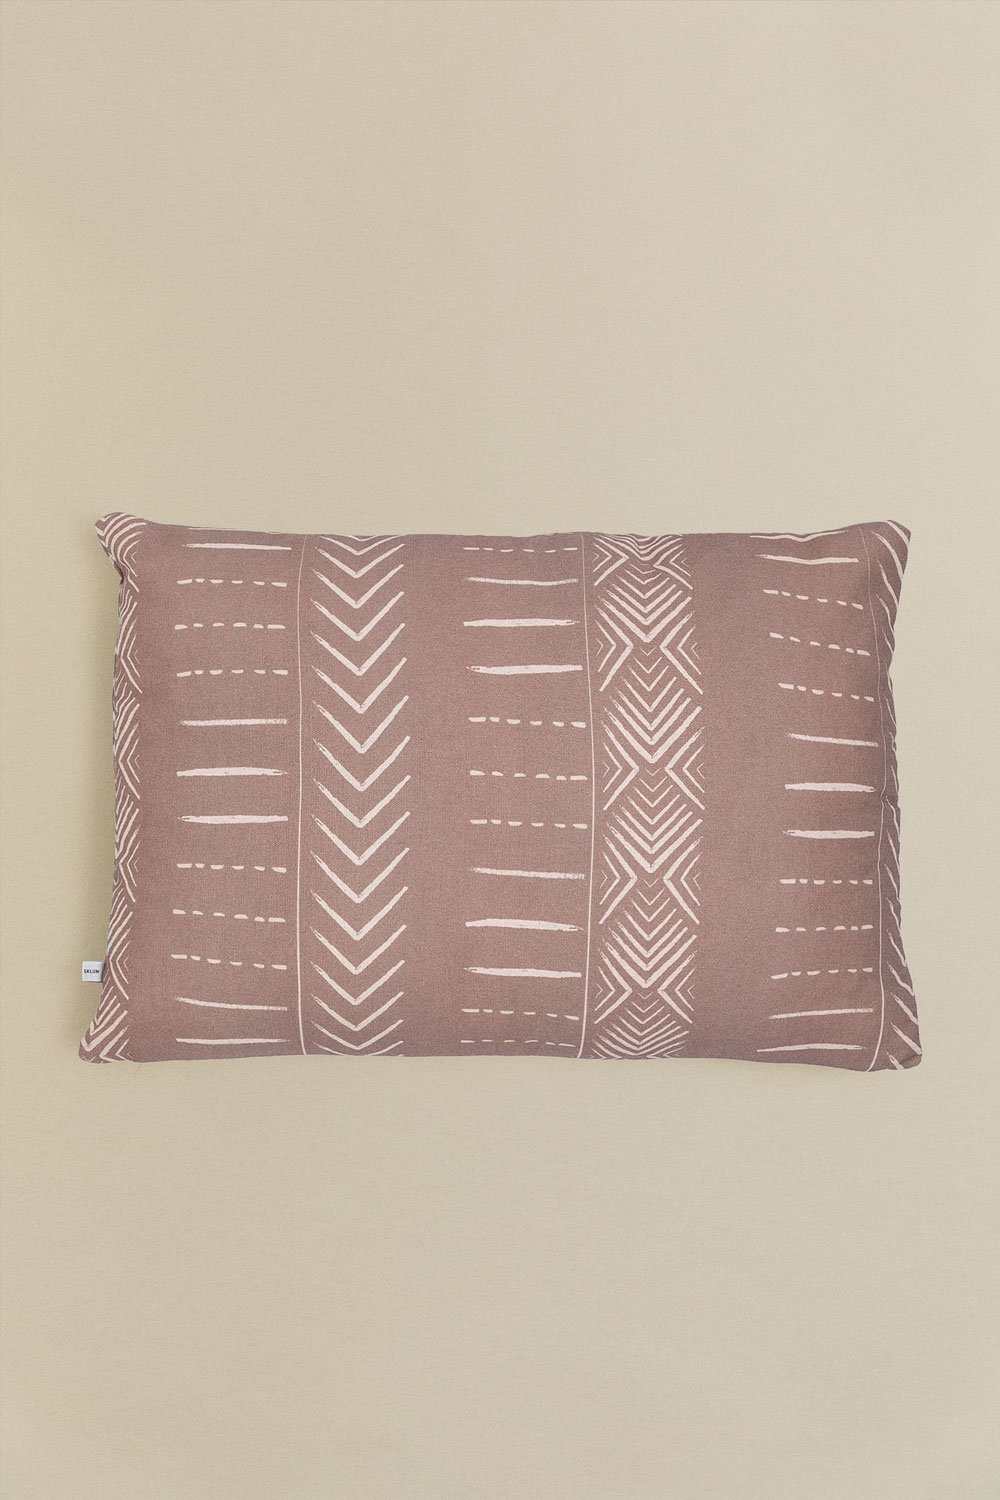 Rectangular Cotton Cushion Cover (40x60cm) Vorax Style, gallery image 1